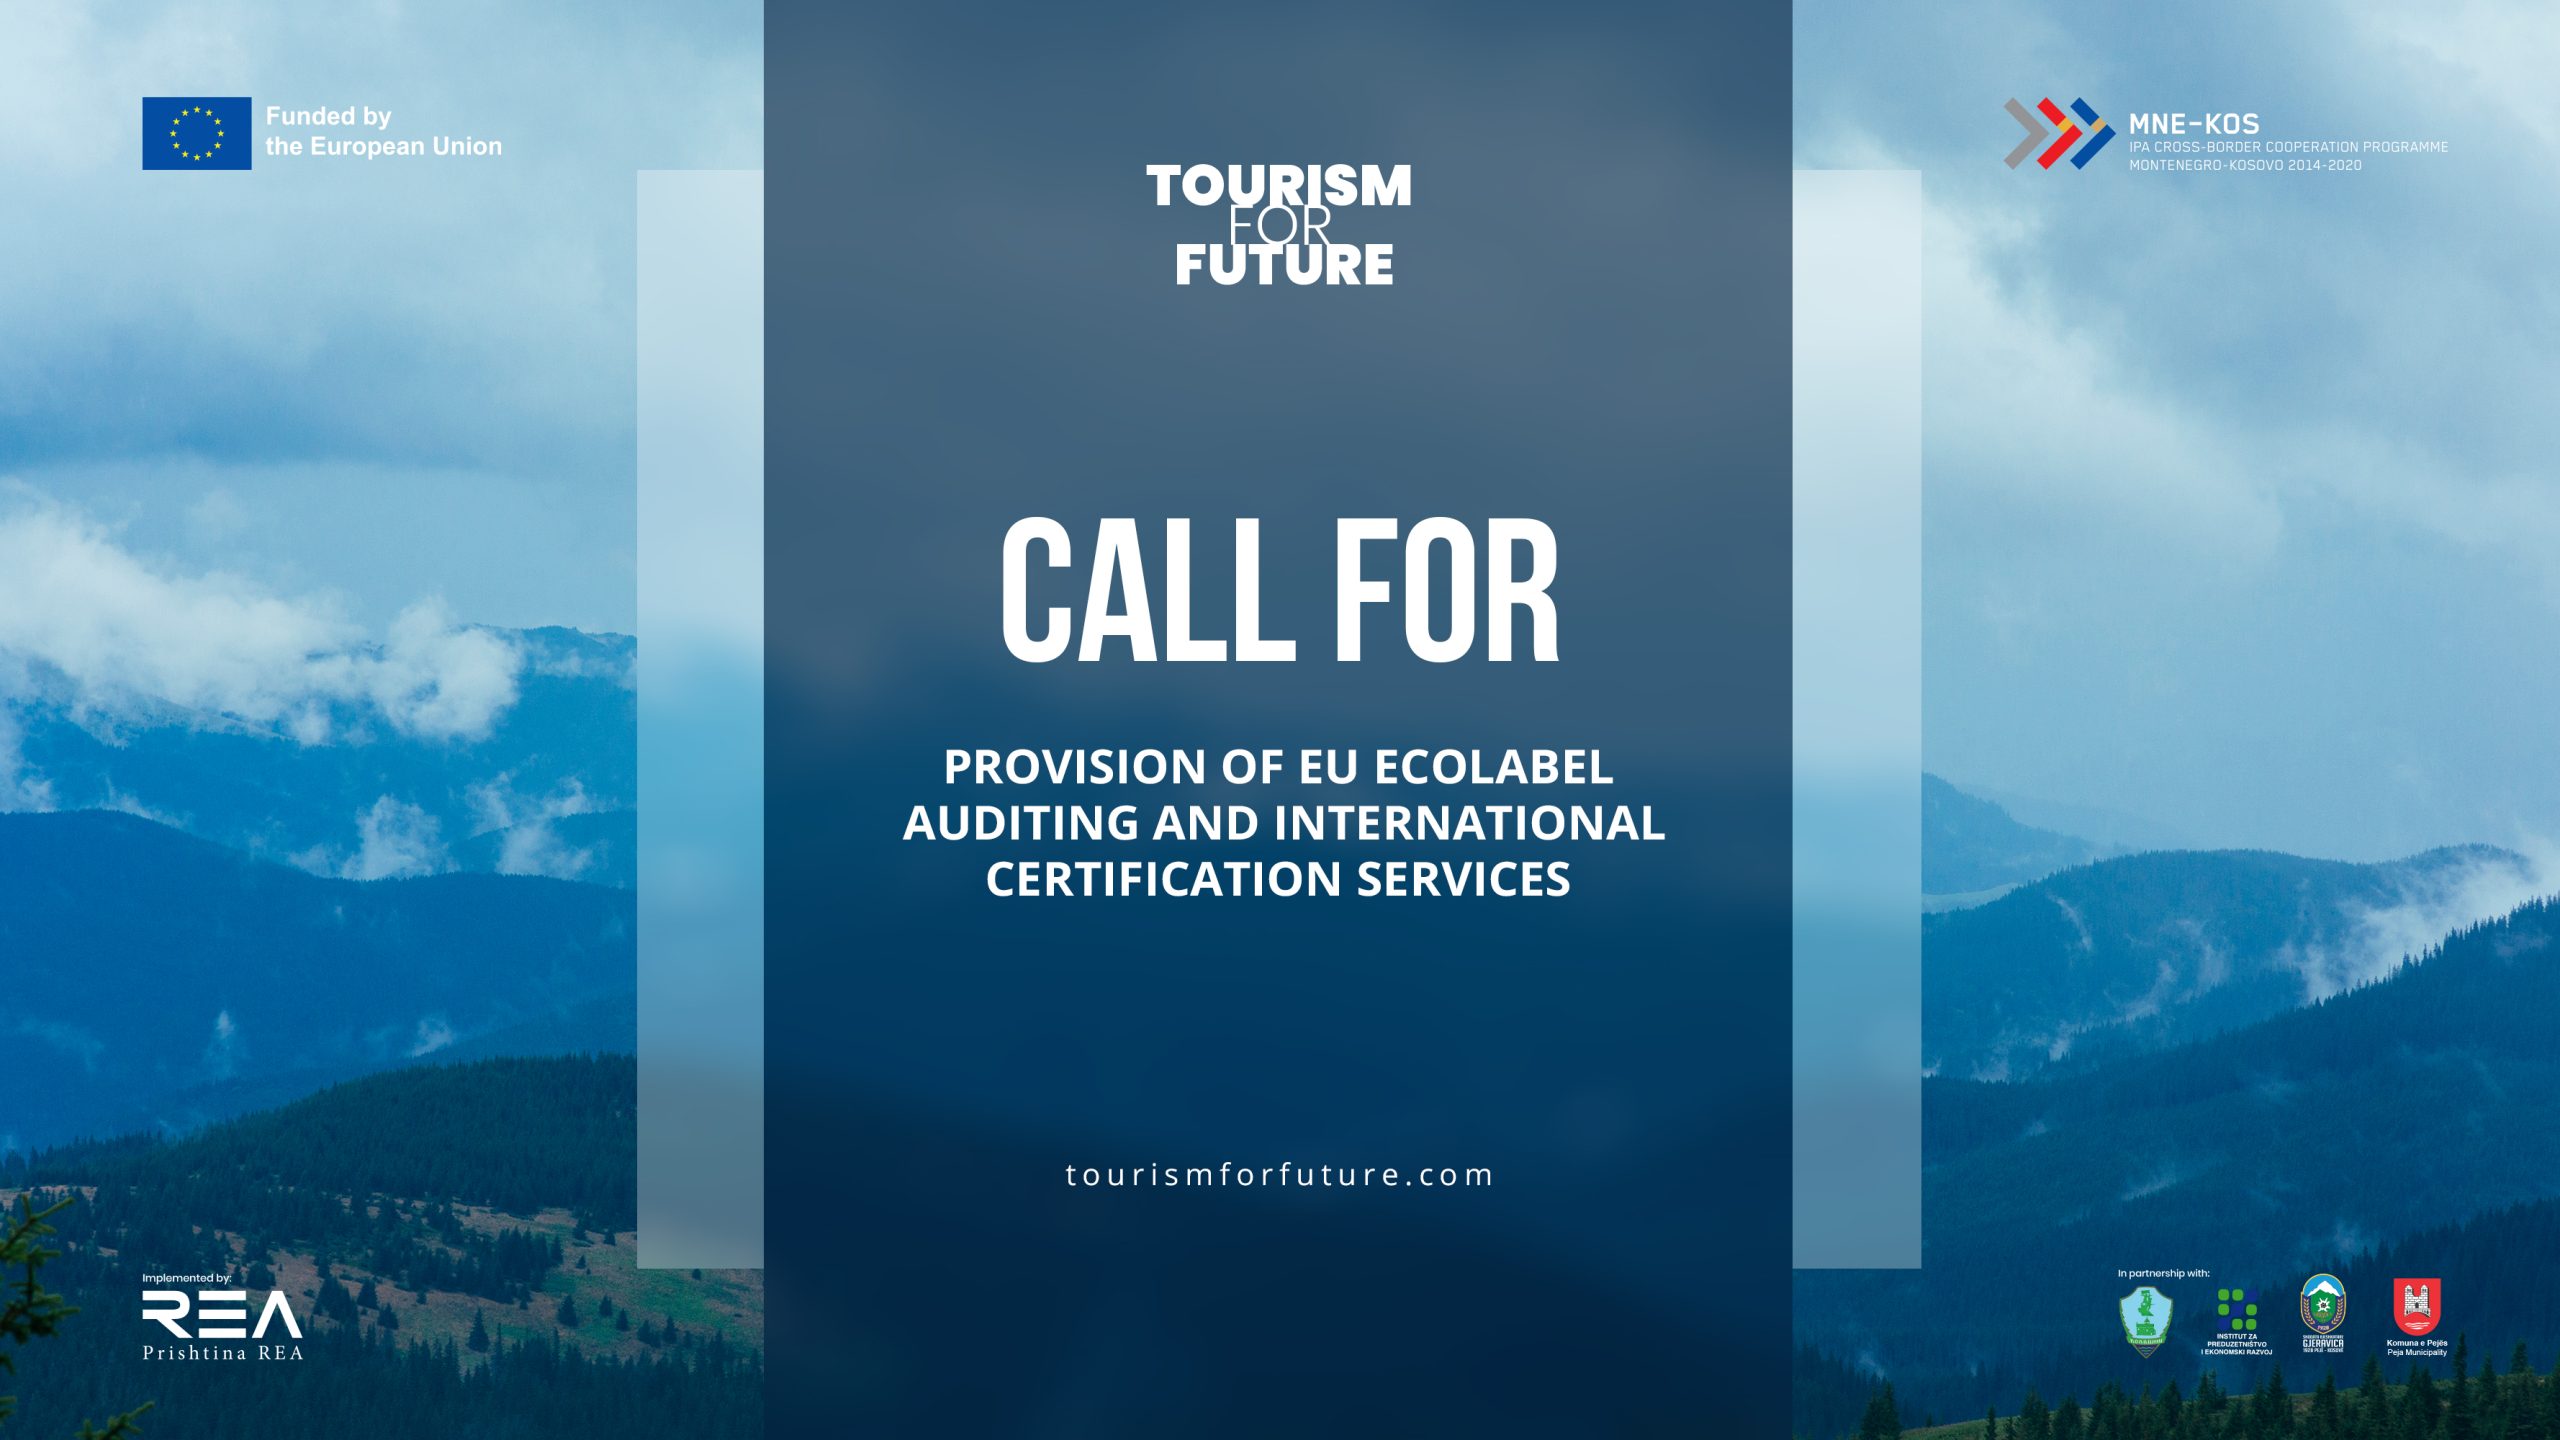 CALL FOR: “Provision of EU ECOLABEL Auditing and International Certification Services”